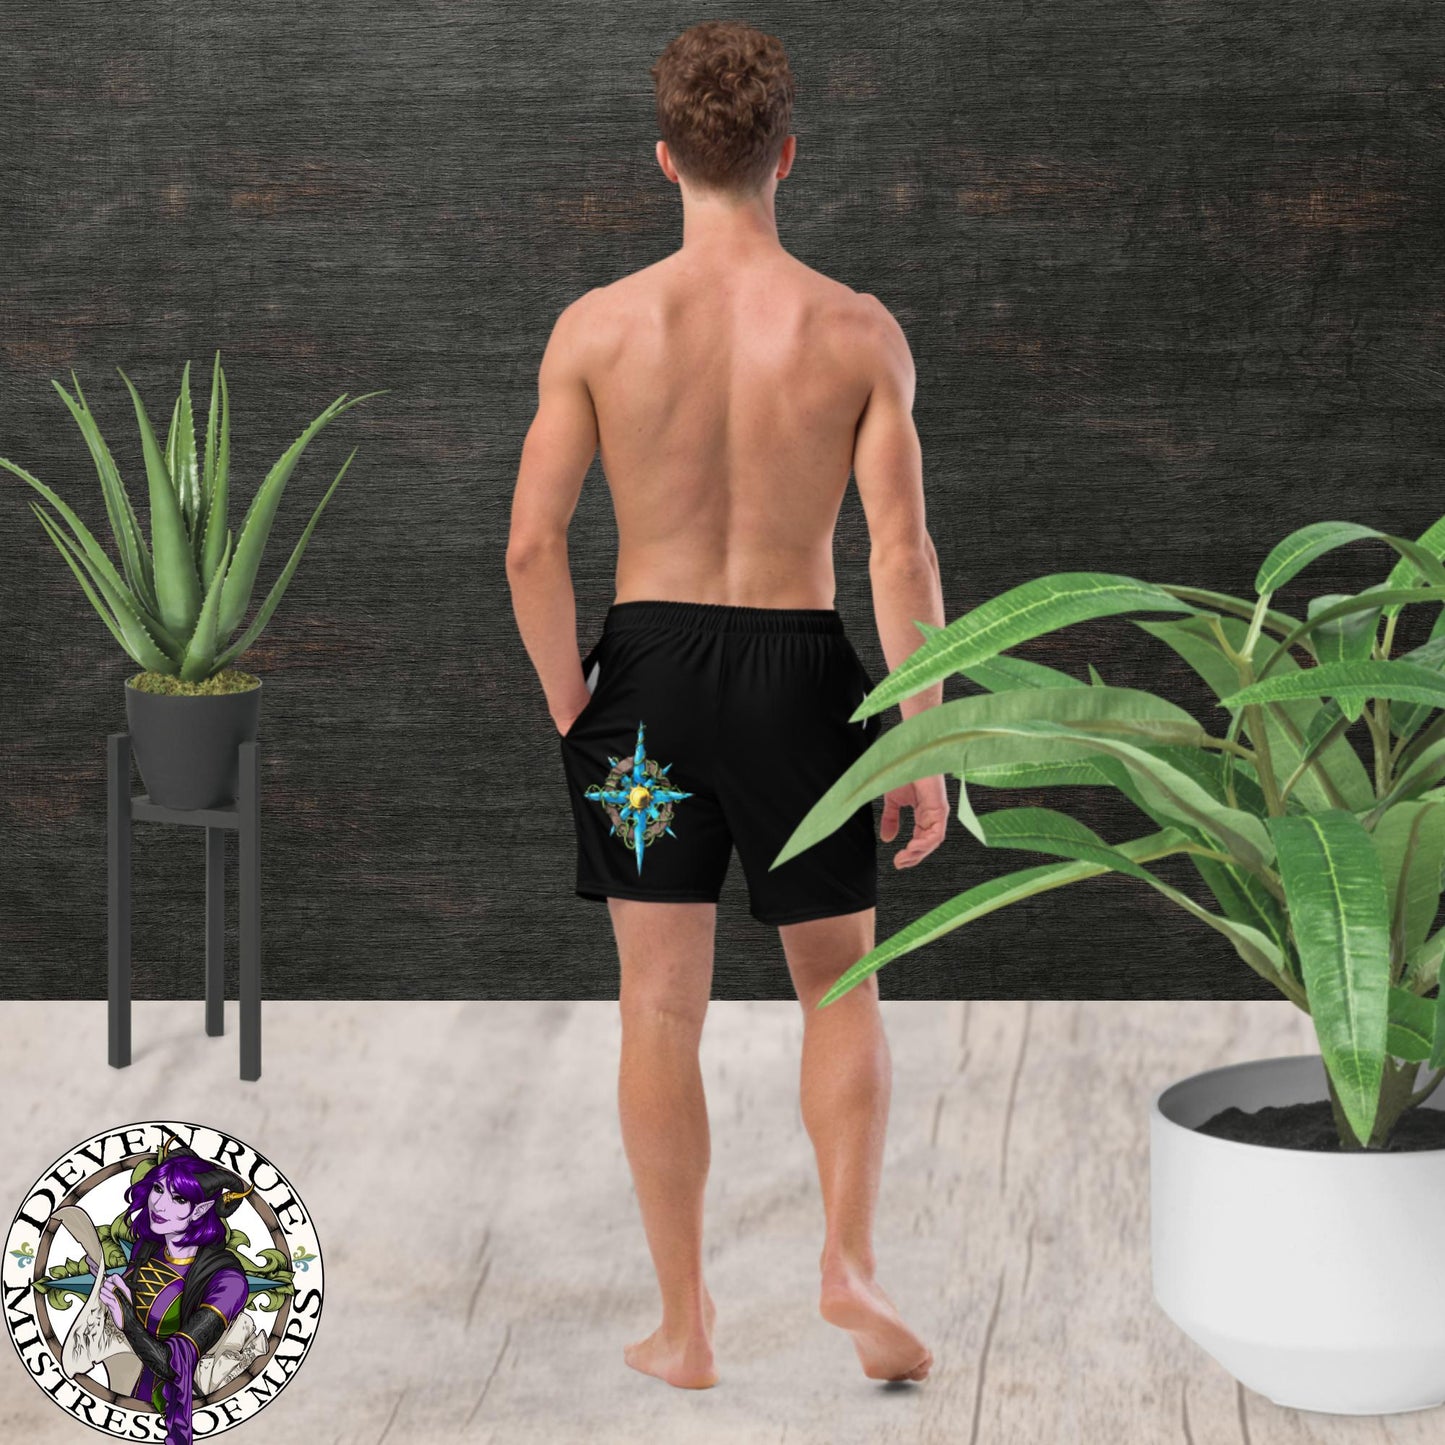 Back View: A model wears black swim trunks with the Wilds Compass Rose design on them.